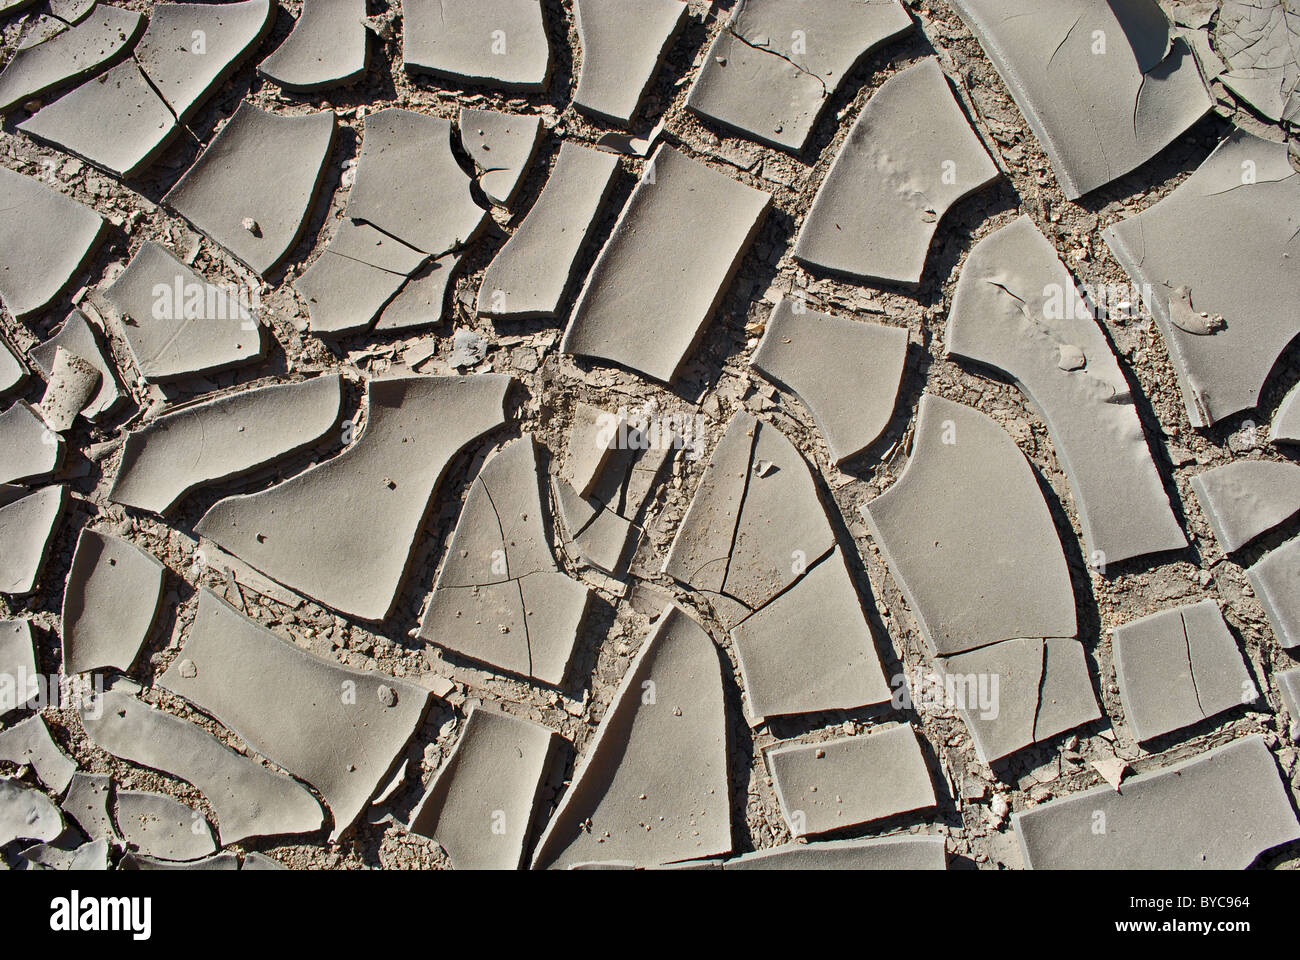 Dry cracked earth en Tunisie Banque D'Images